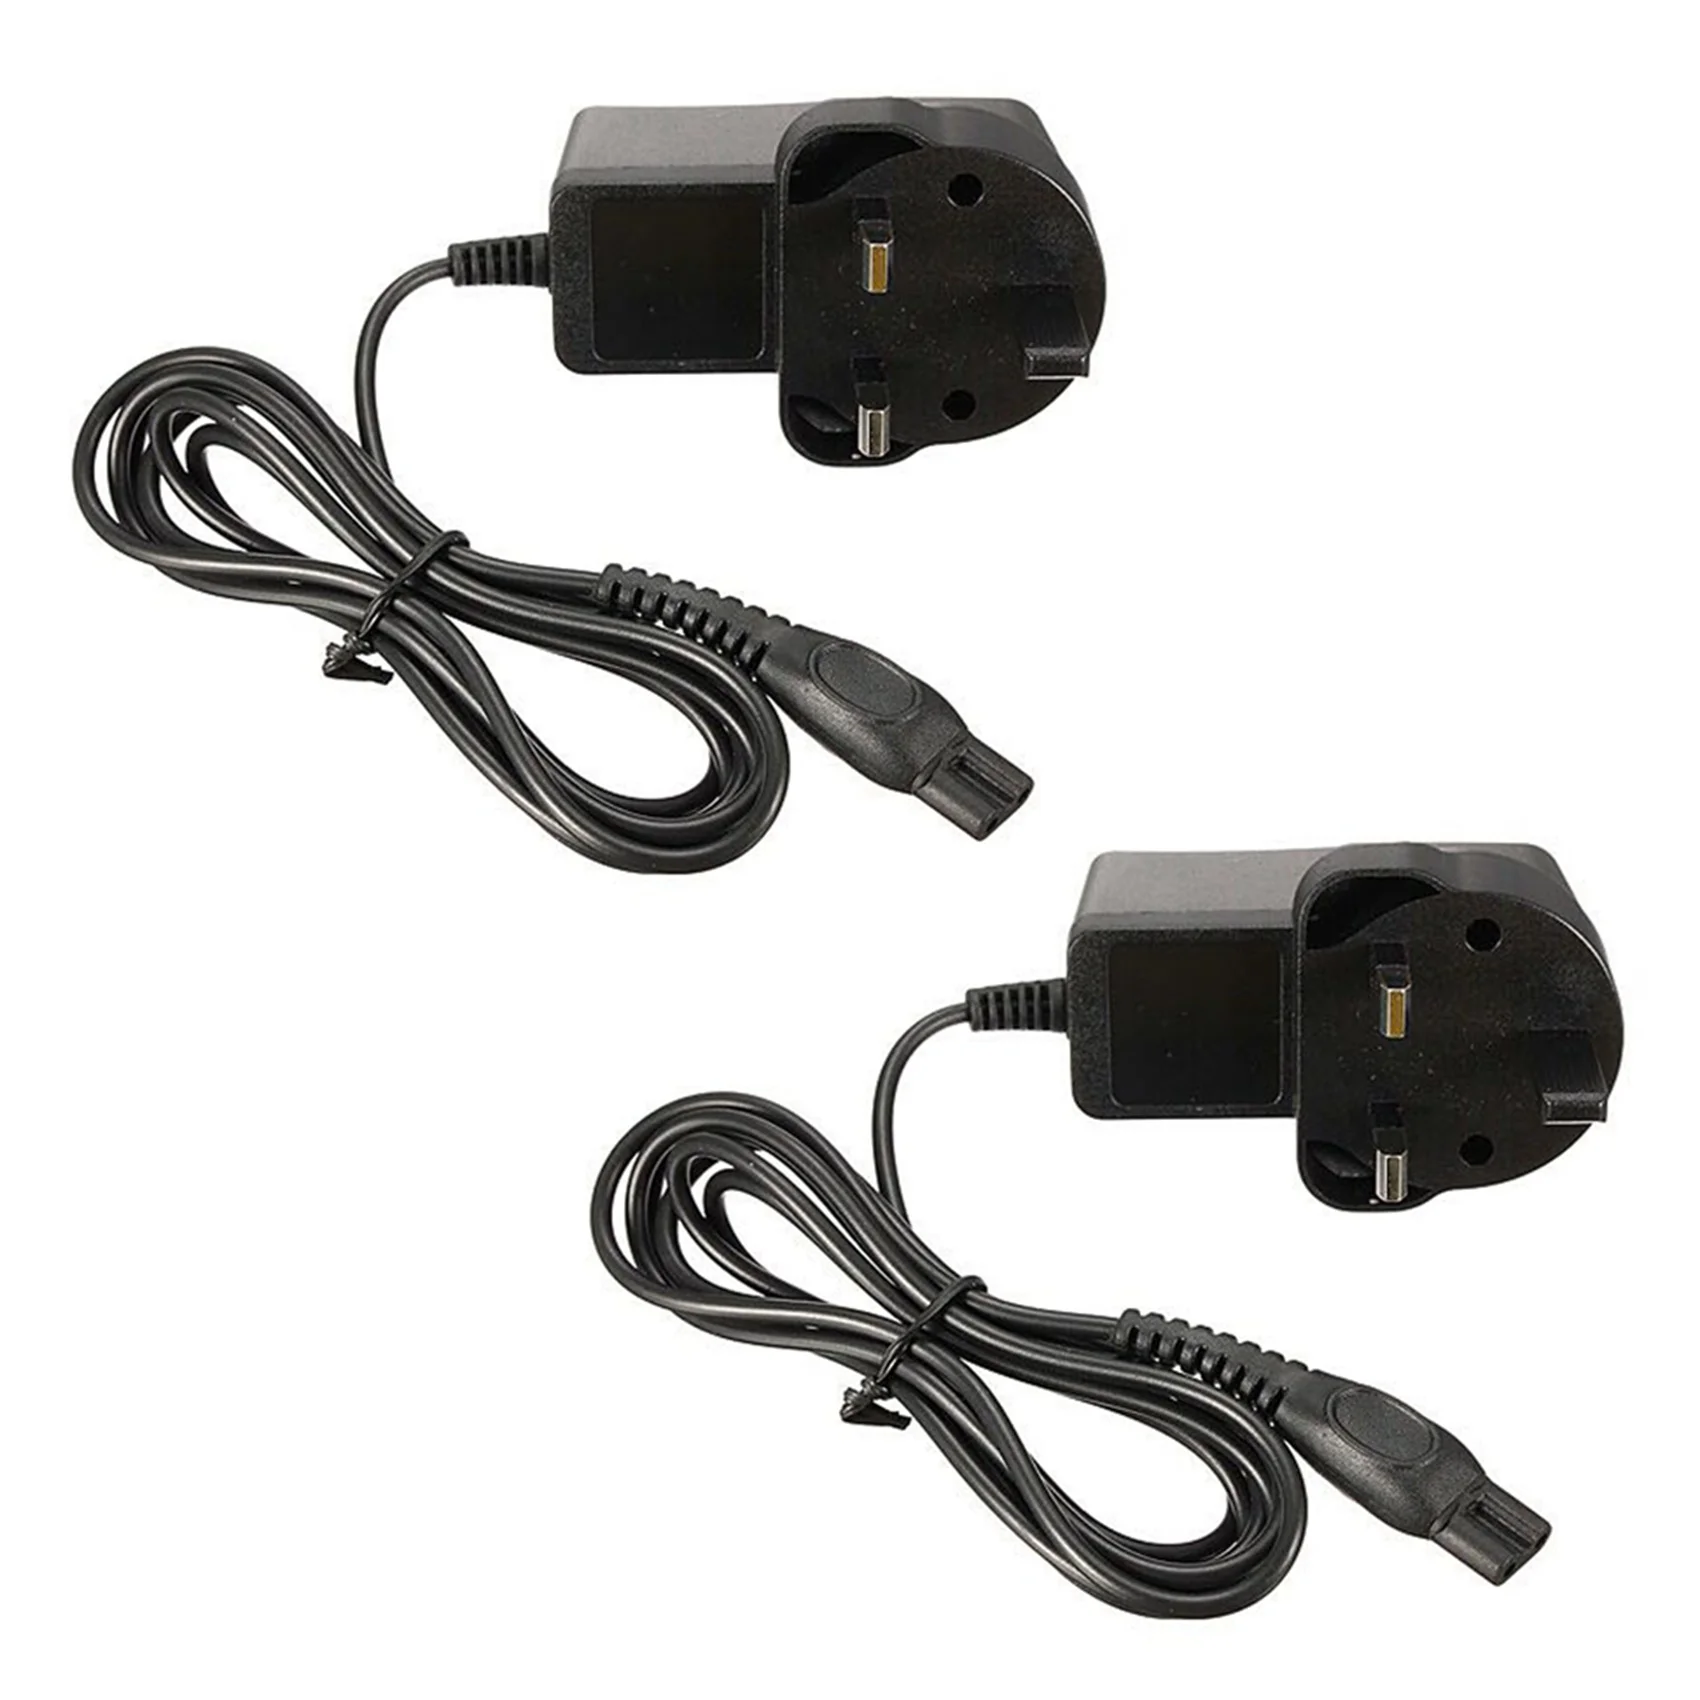 

2X Power Charger Cord Adapter for Philips Shaver Hq8505 Hq7380 Hq8500 (Uk Plug)